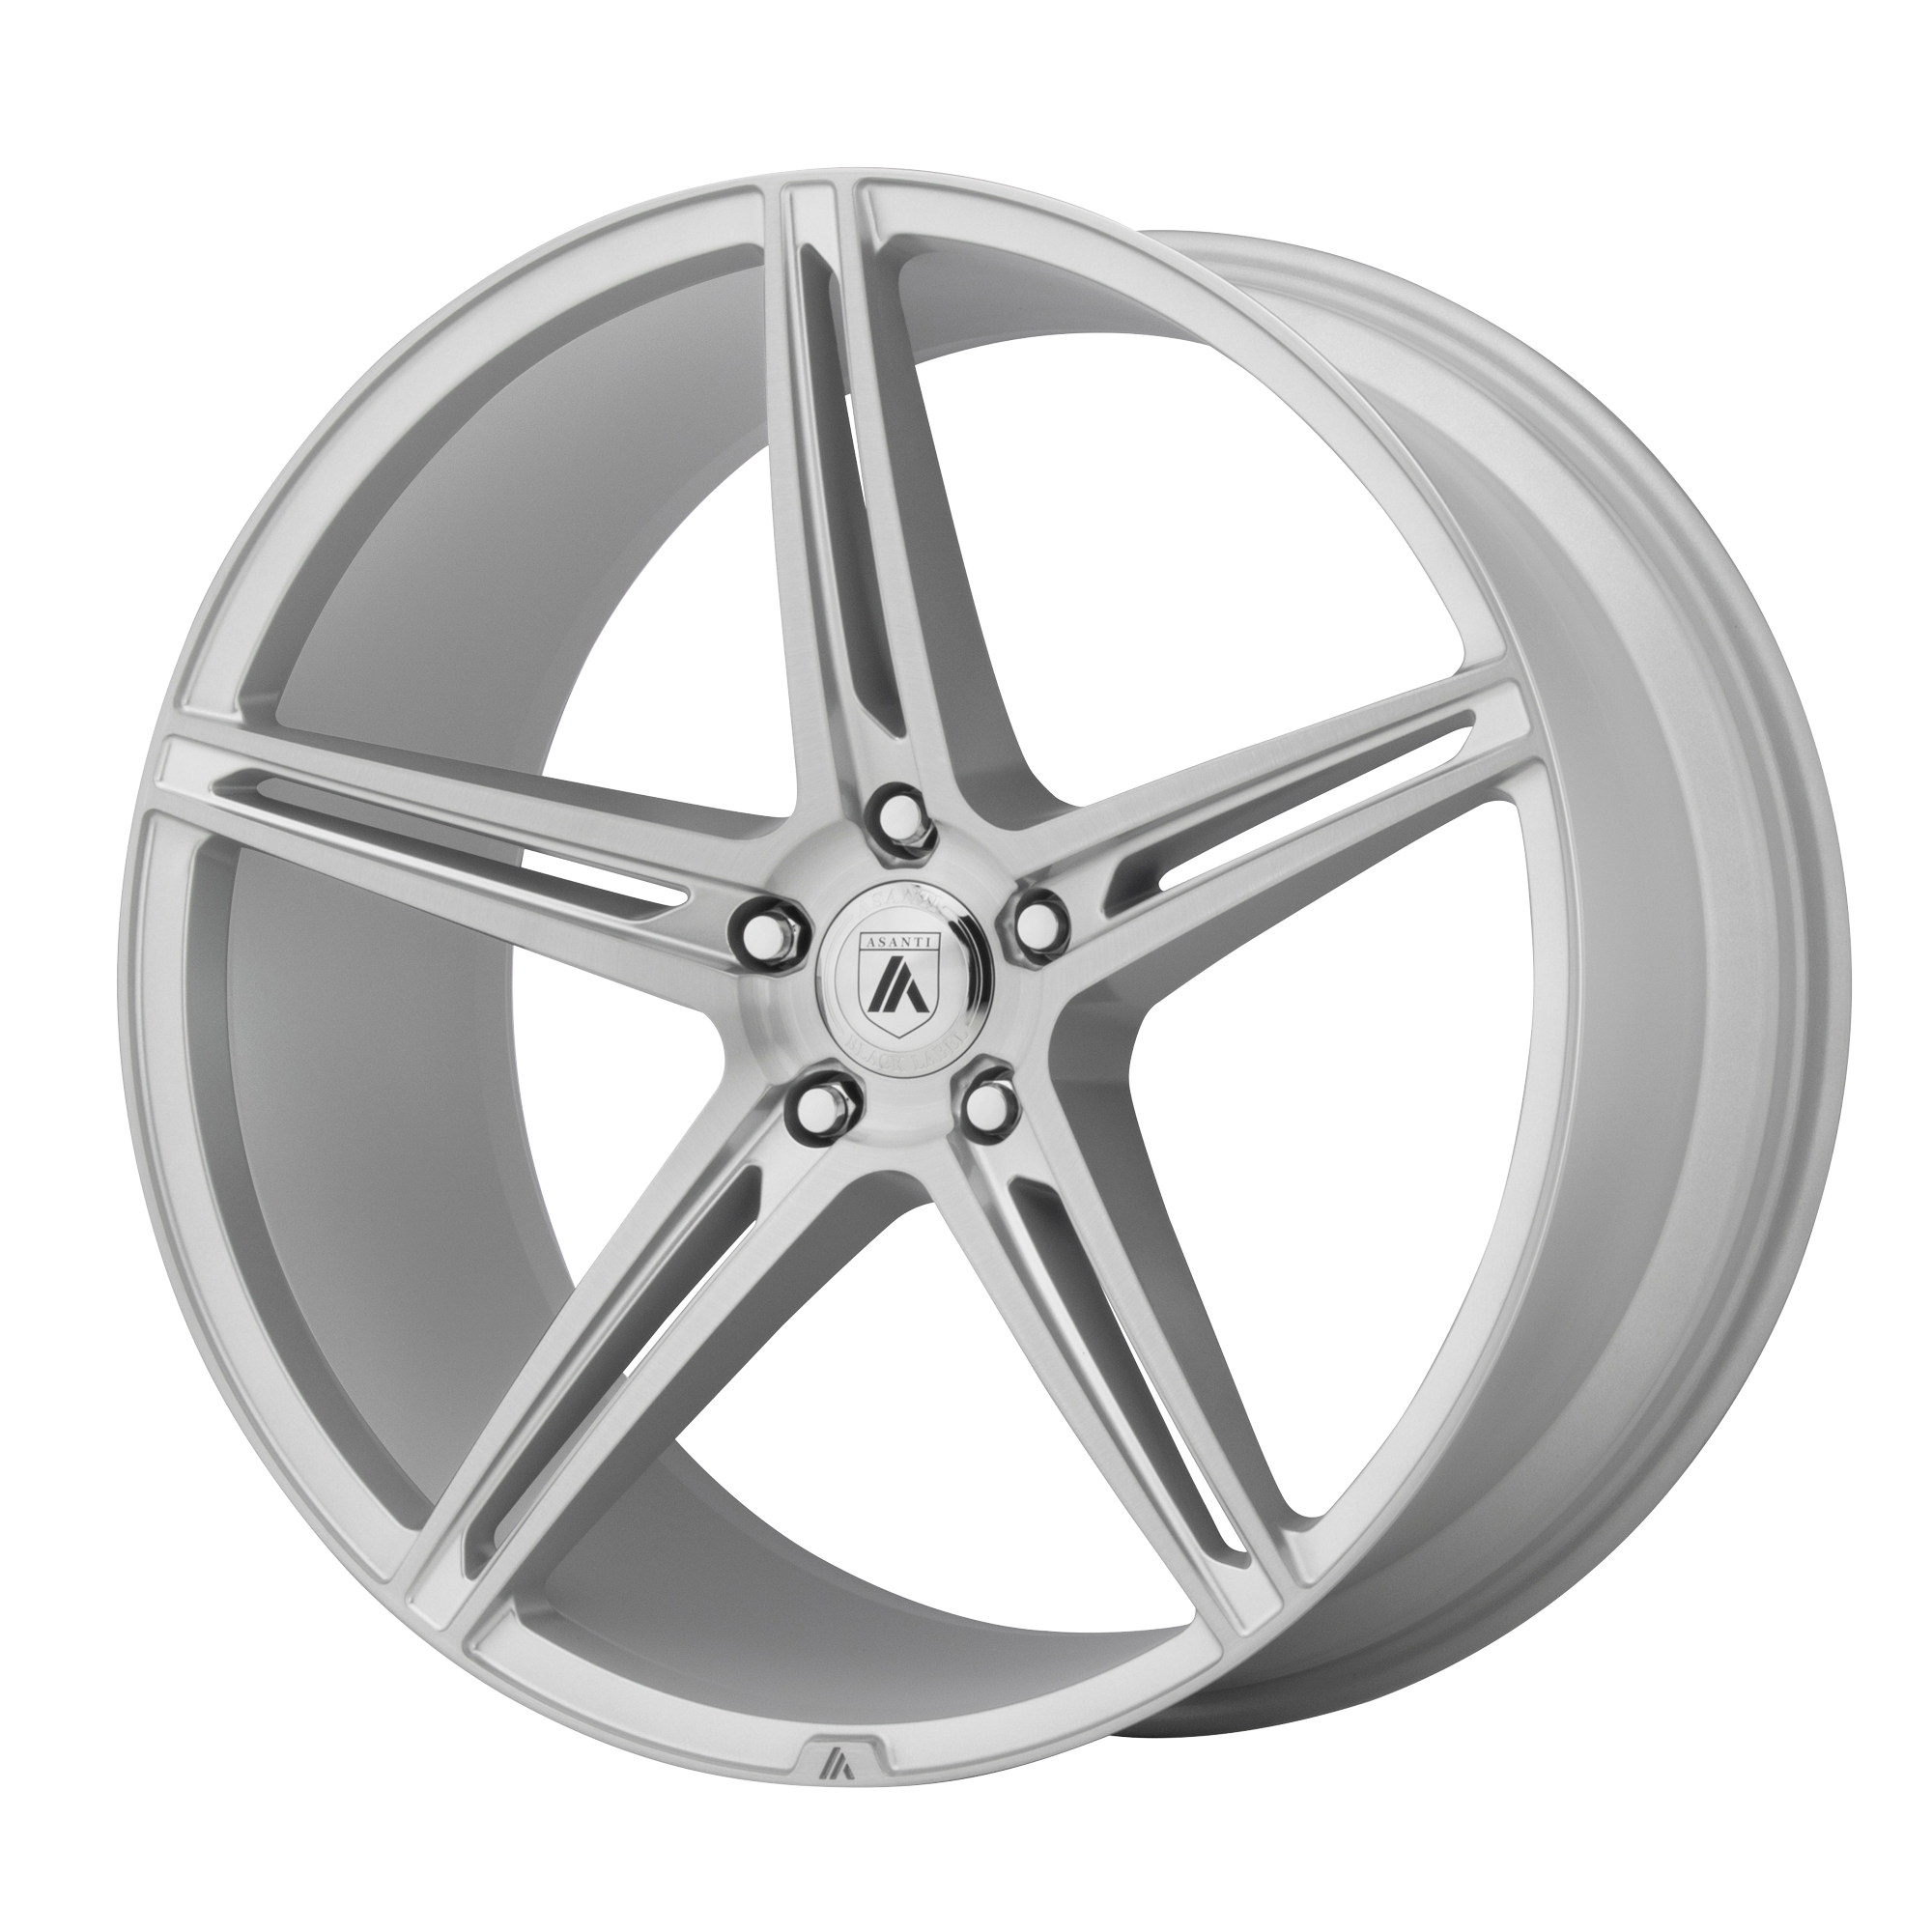 ALPHA 5 20x8.5 5x120.00 BRUSHED SILVER (38 mm) - Tires and Engine Performance